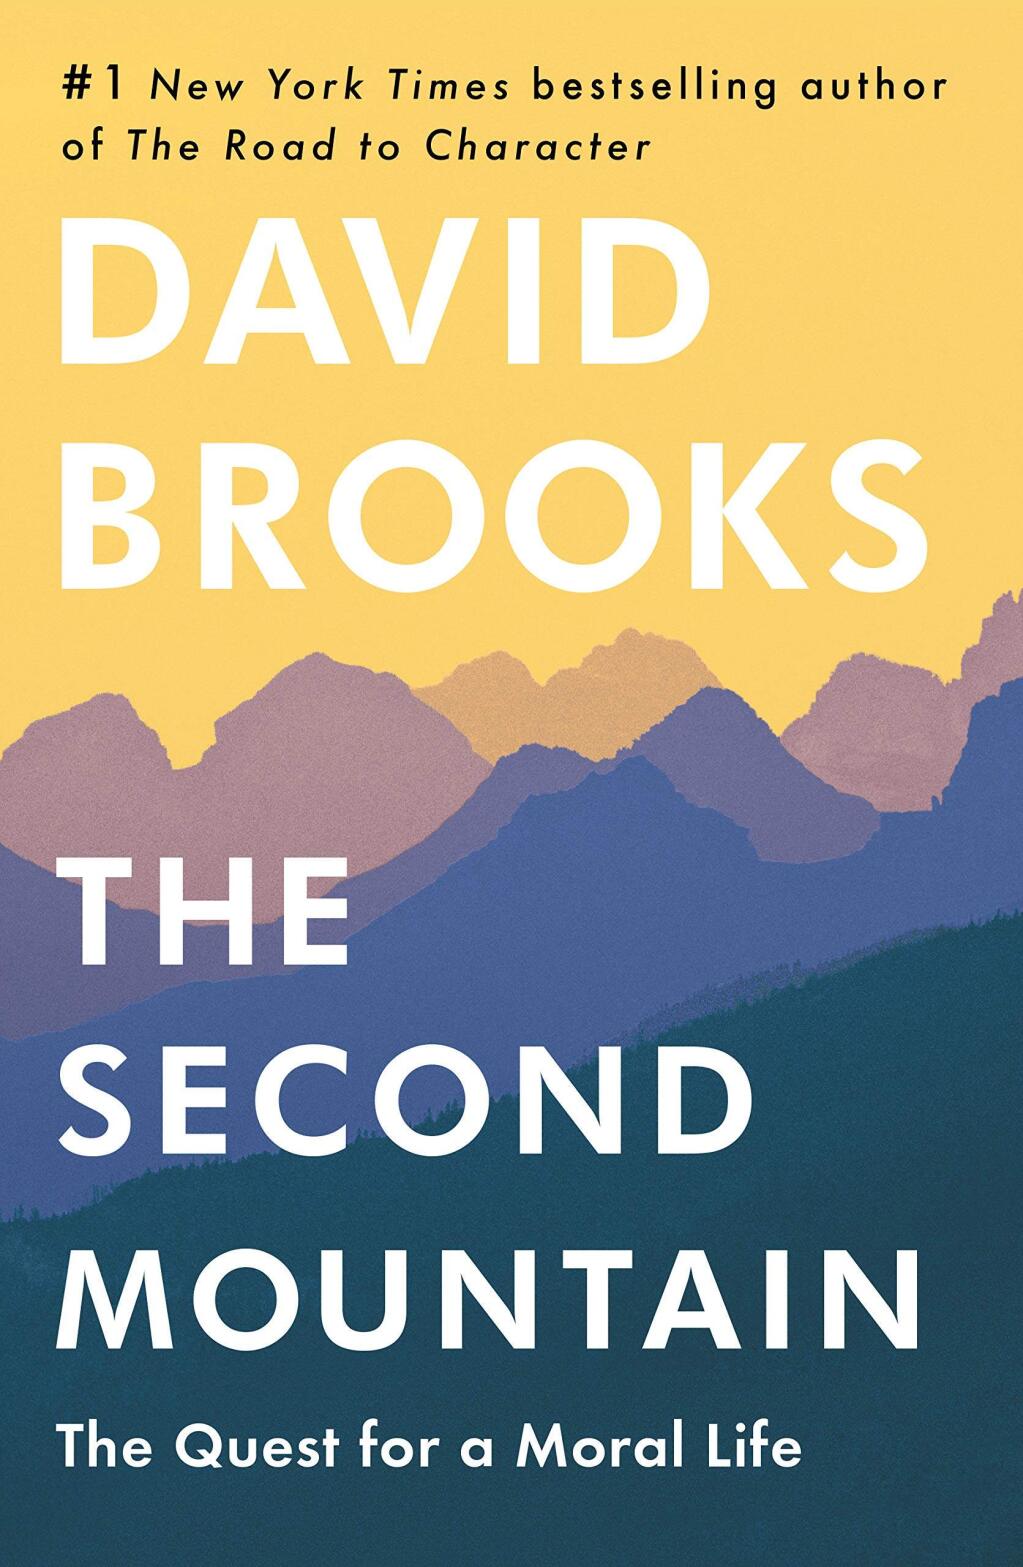 David Brooks' 'the Second Mountain' is the No. 1 bestselling book in Petaluma this weeks.